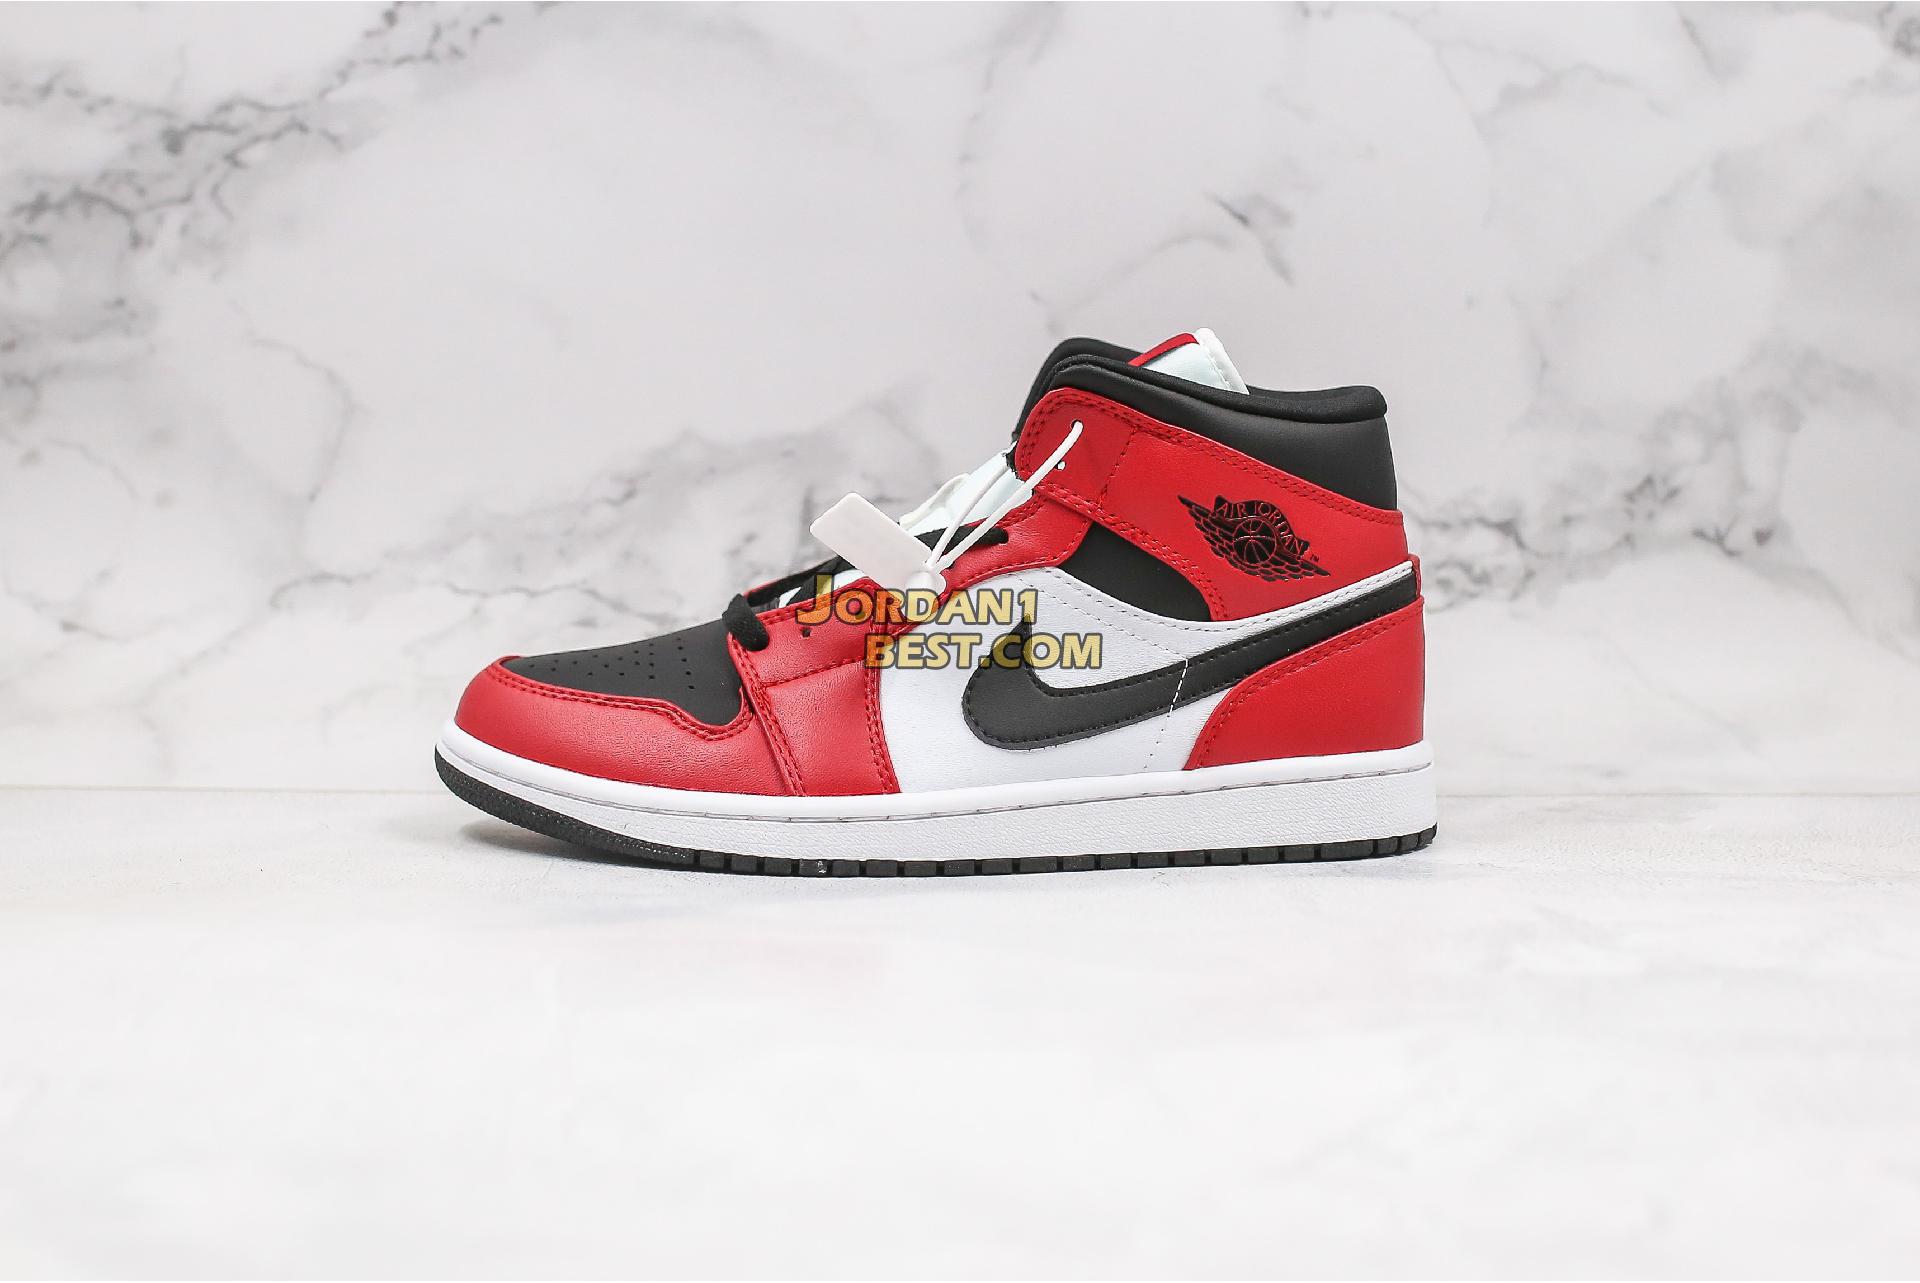 top 3 fake 2020 Air Jordan 1 Mid "Chicago Black Toe" 554724-069 Mens Womens black/gym red-white Shoes replicas On Wholesale Sale Online